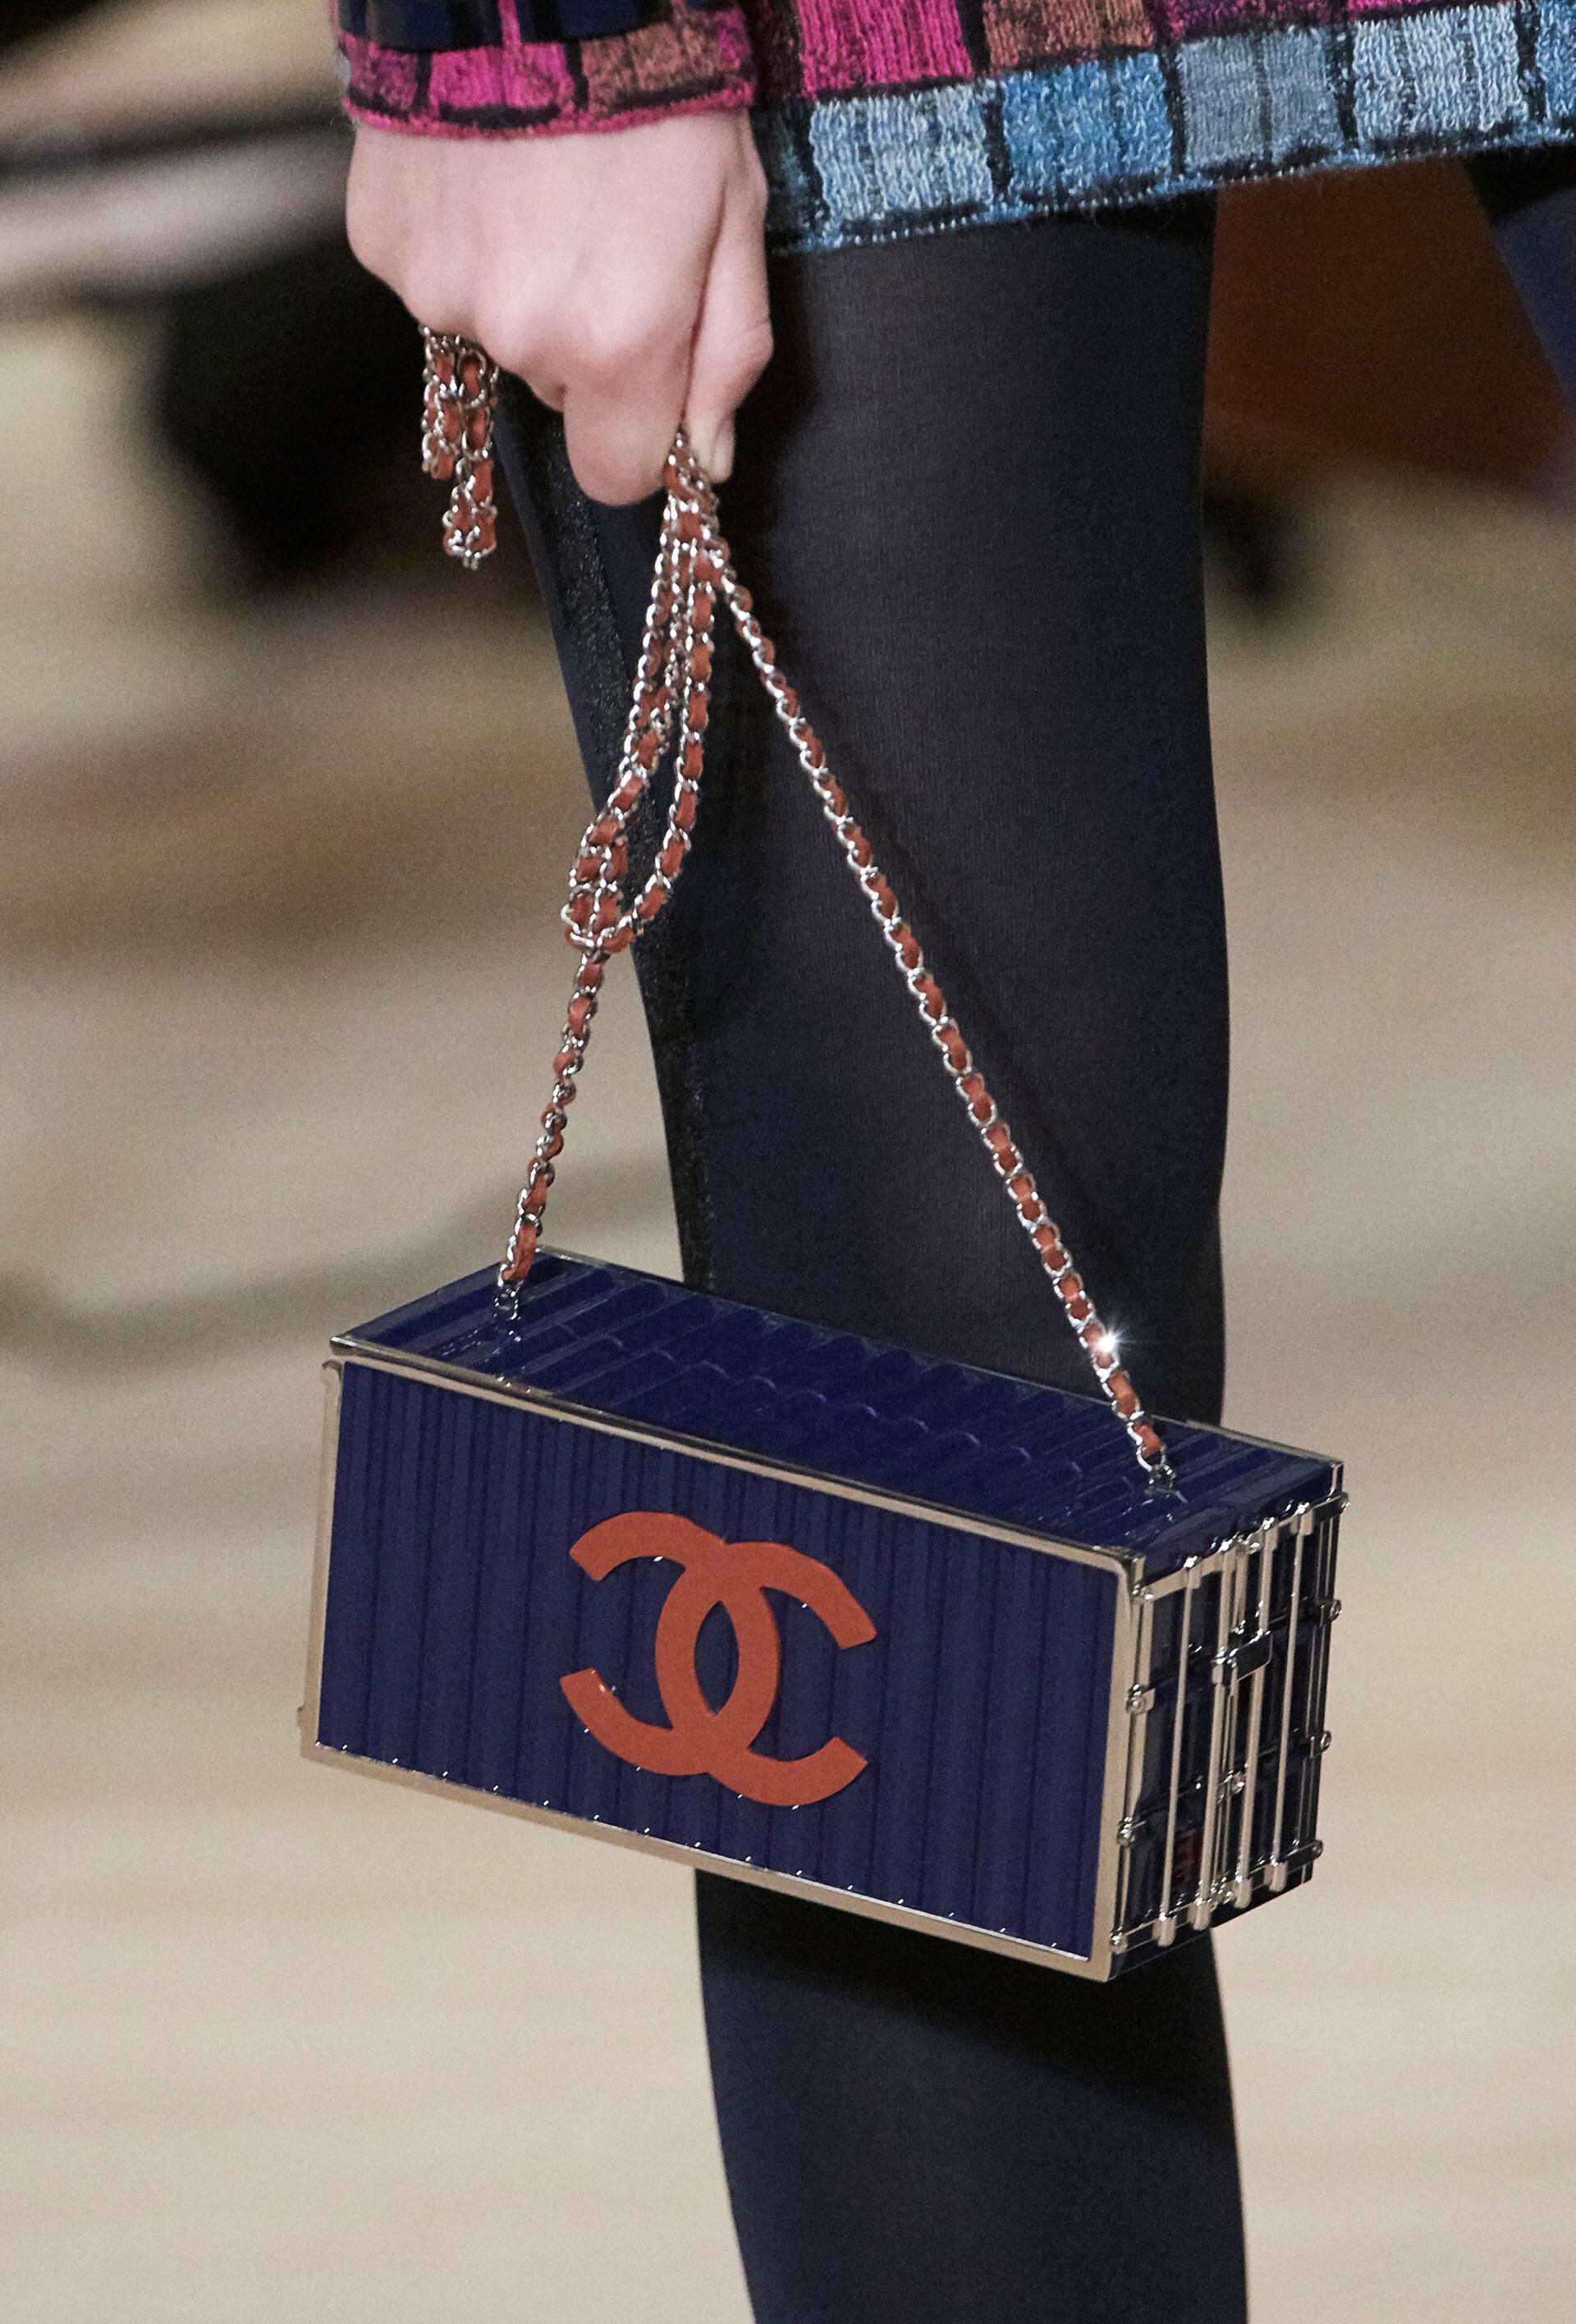 Chanel Paris-Hamburg Shipping Container Minaudiere - Evening Bags